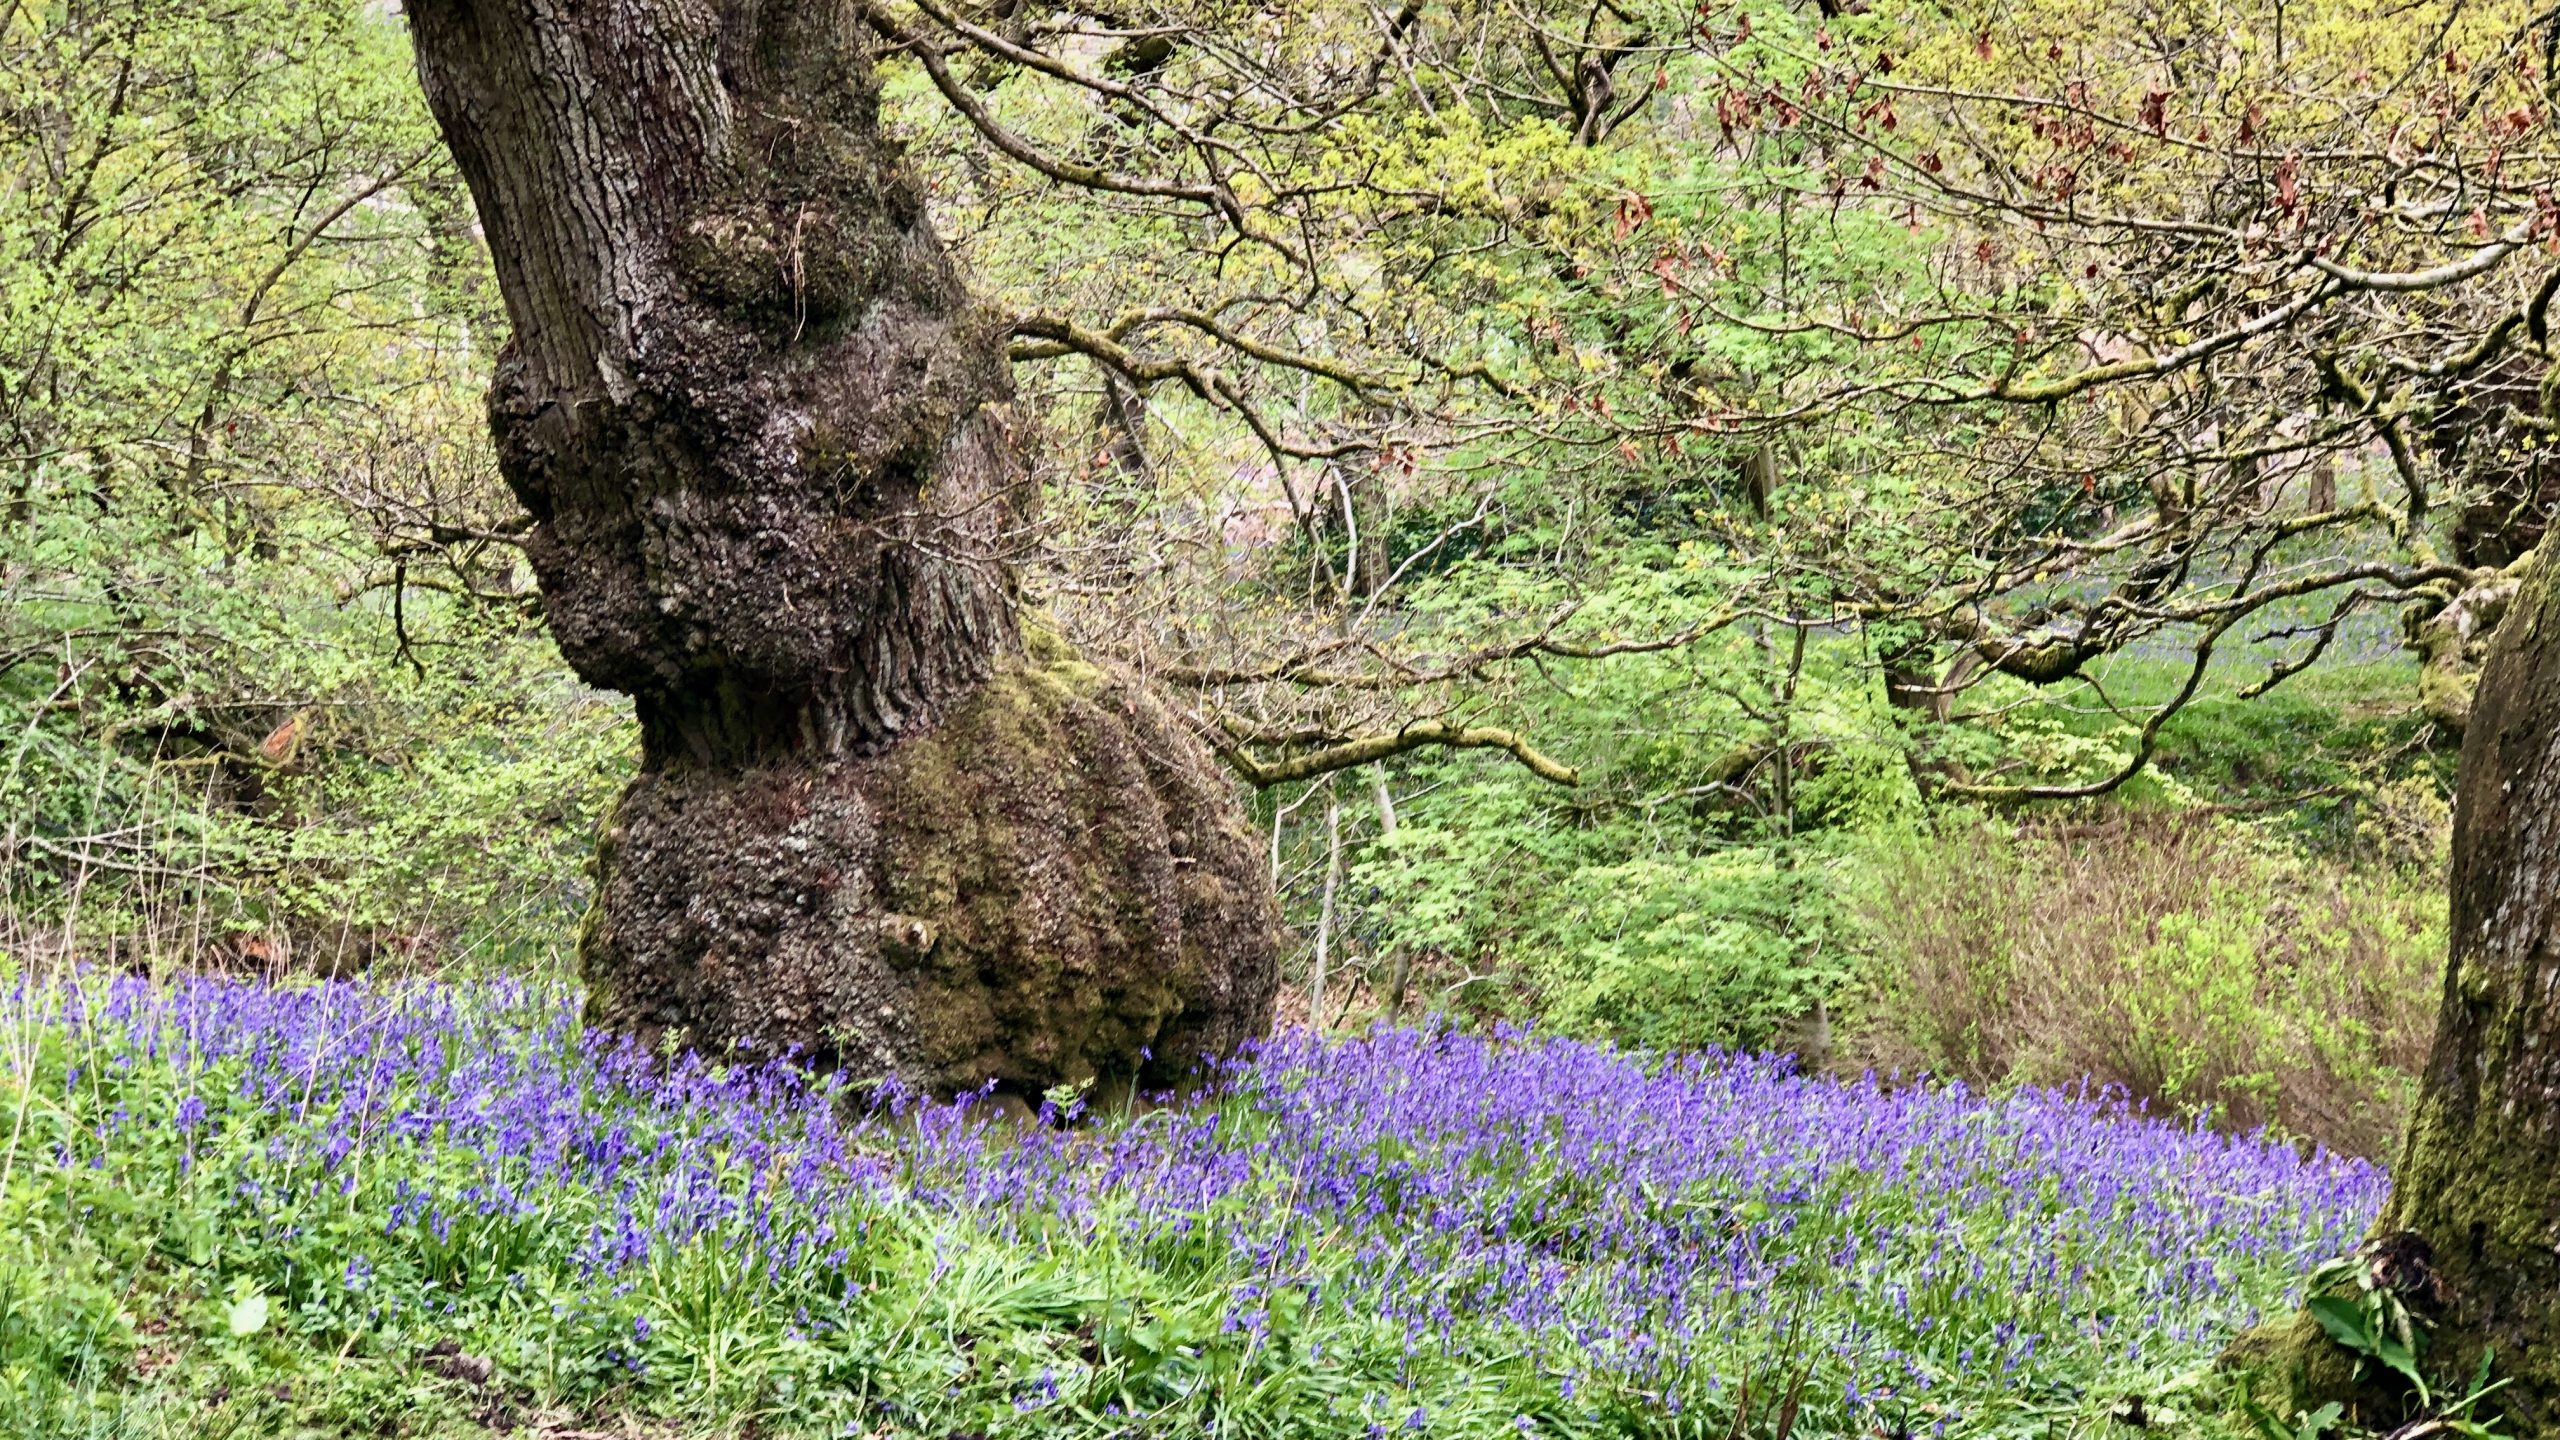 The base of a mature oak tree trunk showing signs of a large burr. On the woodland floor is a carpet of bluebells.